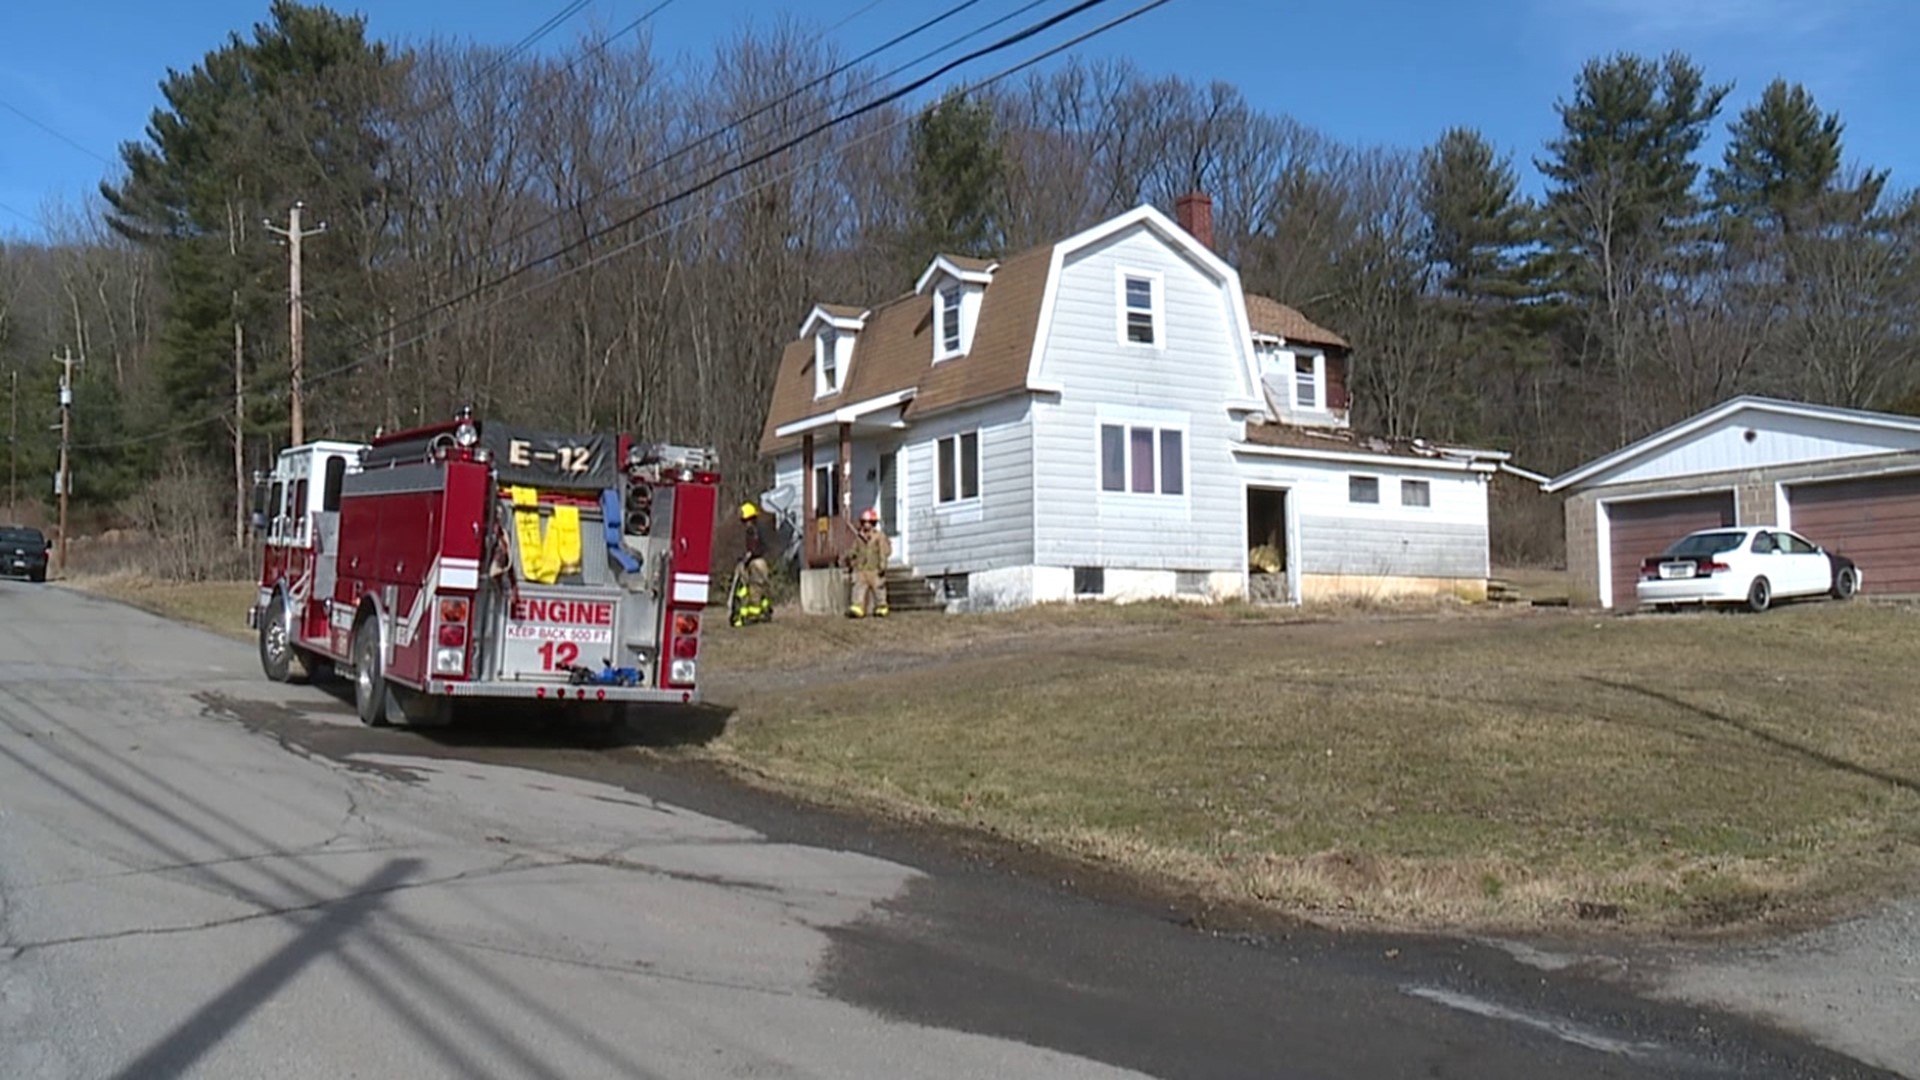 Flames broke out around 10:30 a.m. Monday morning along Old Boston Road in Sugarloaf Township.